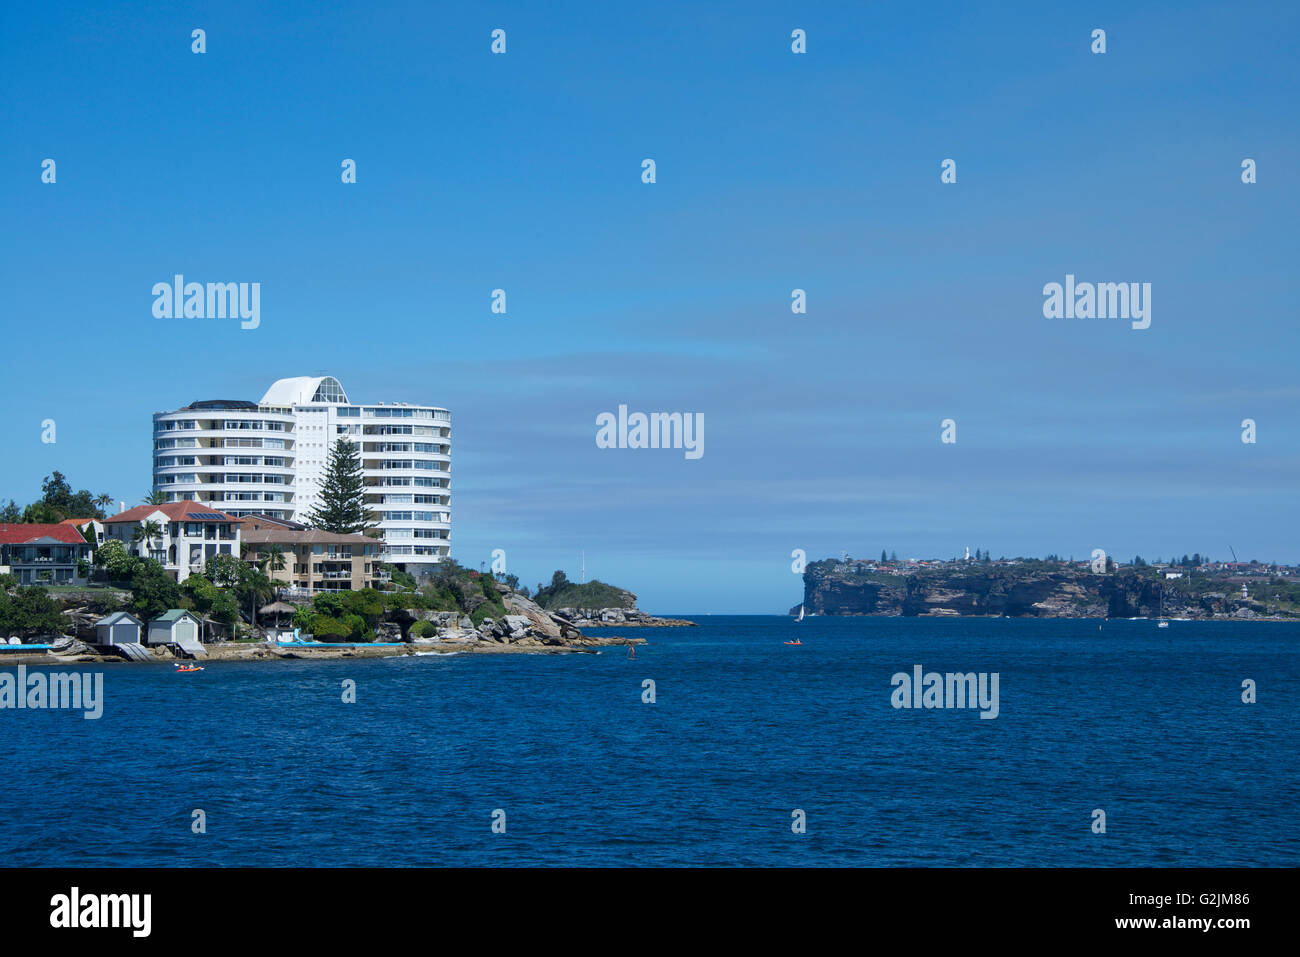 Apartment block and entance to Sydney Harbour Harbourside Beach Manly Sydney NSW Australia Stock Photo